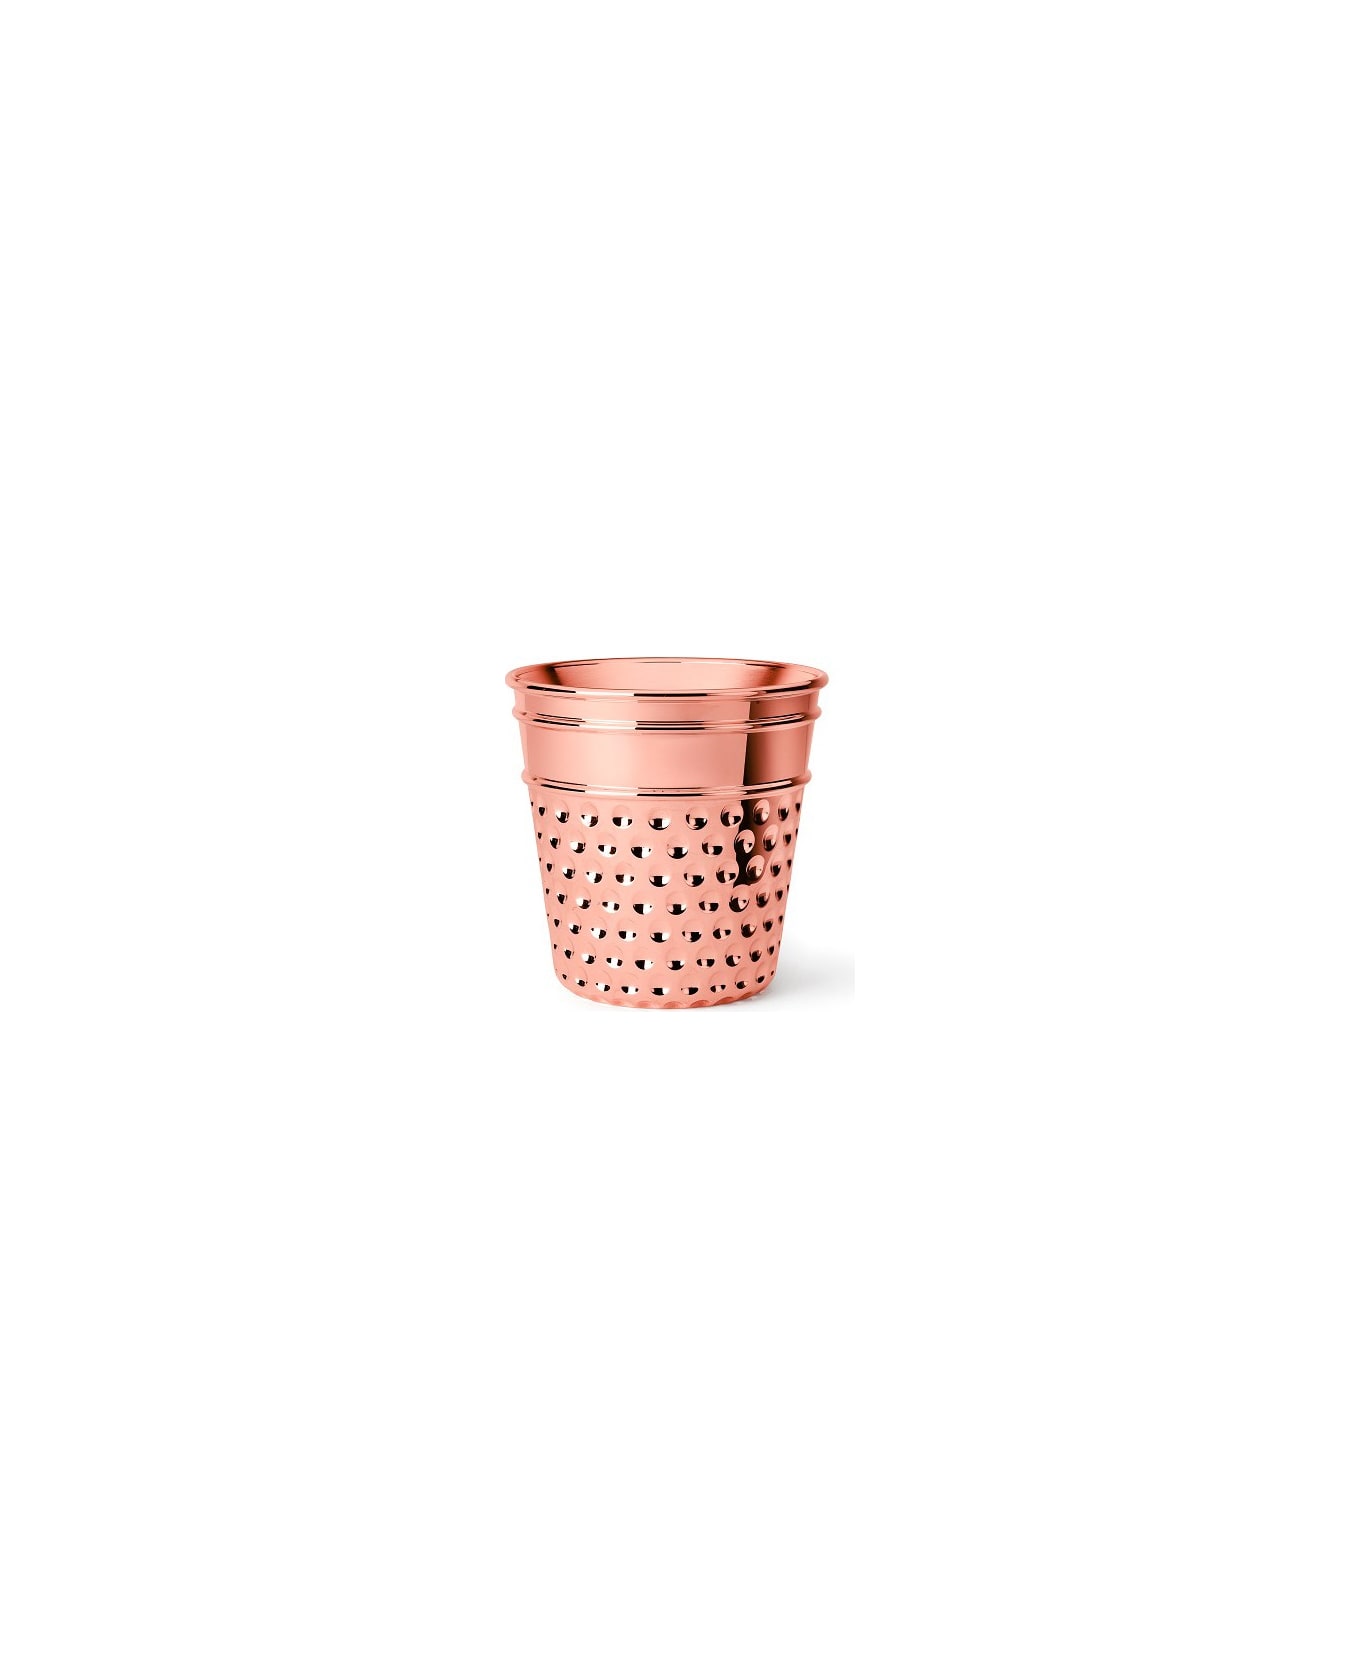 Ghidini 1961 Here (thimble) Rose Gold - Rose gold